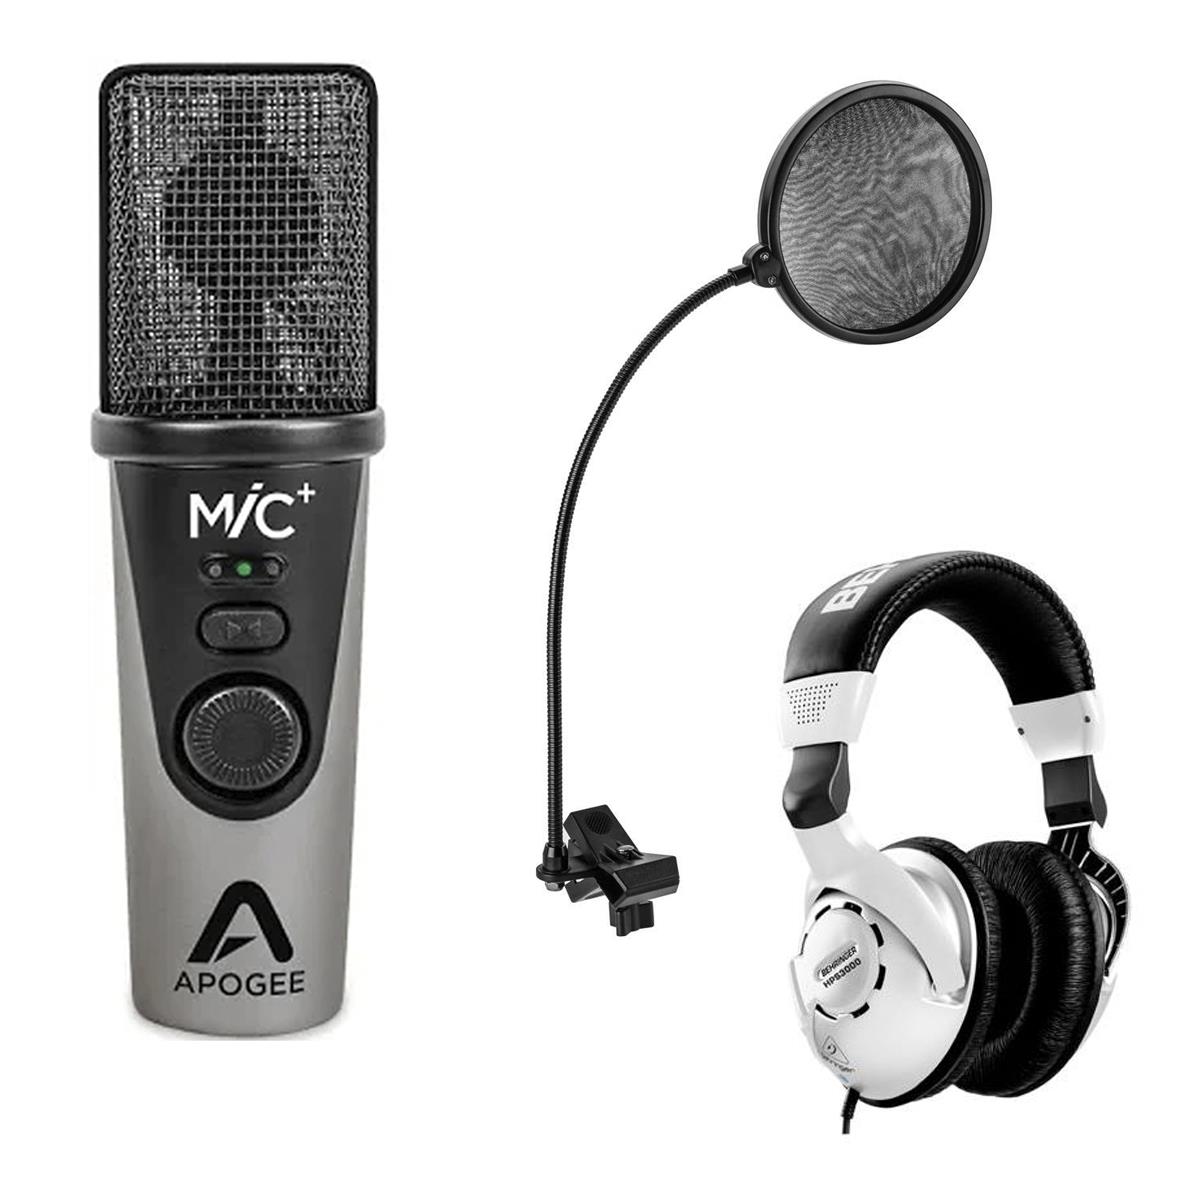 Image of Apogee Electronics MiC Plus USB Cardioid Condenser Microphone With Accessory Kit